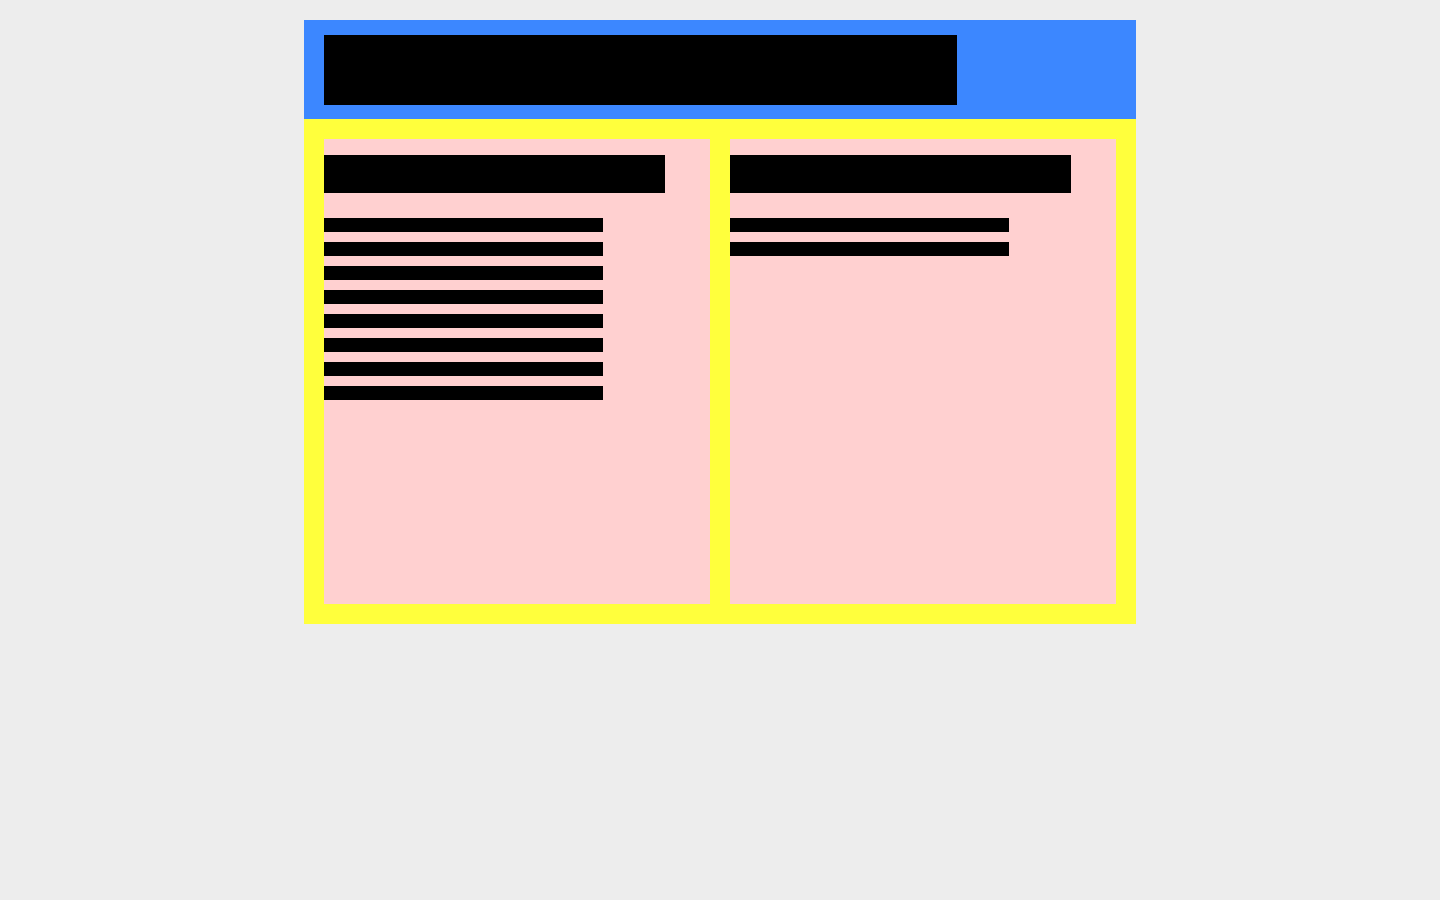 wireframe of what the site should look like